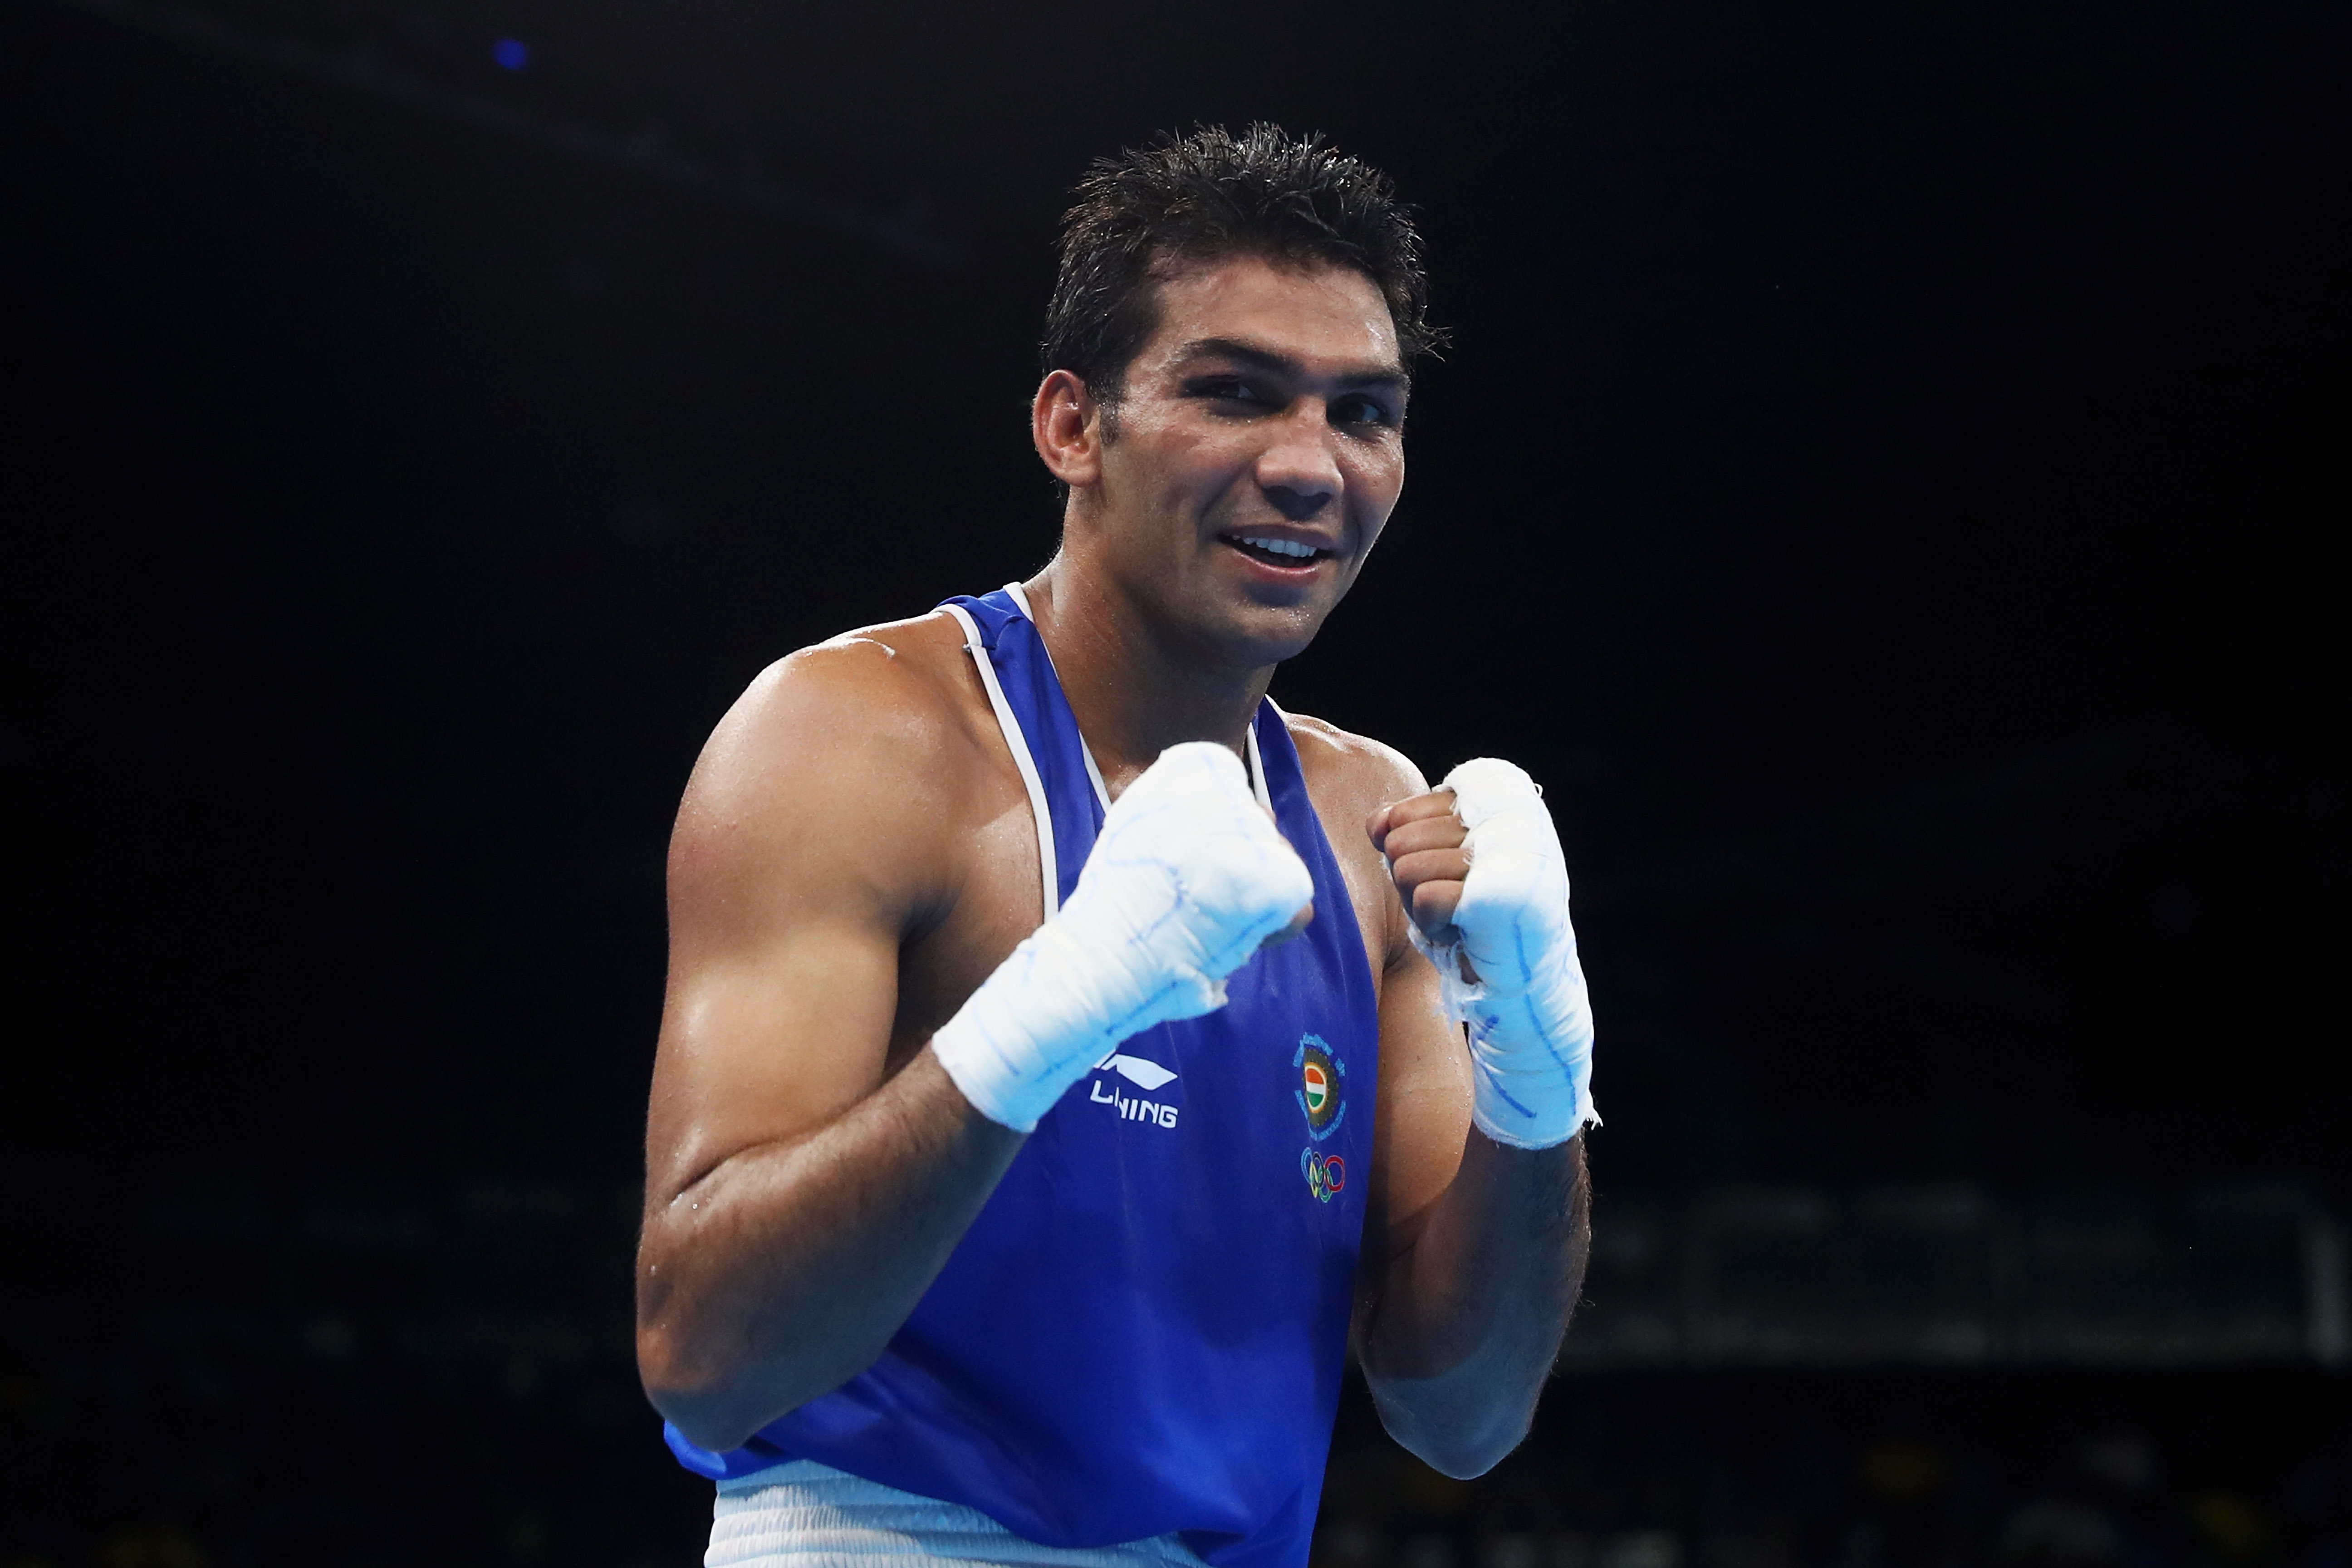 Manoj Kumar : I want to make it big in amateur boxing by winning medals at Asia and Olympics